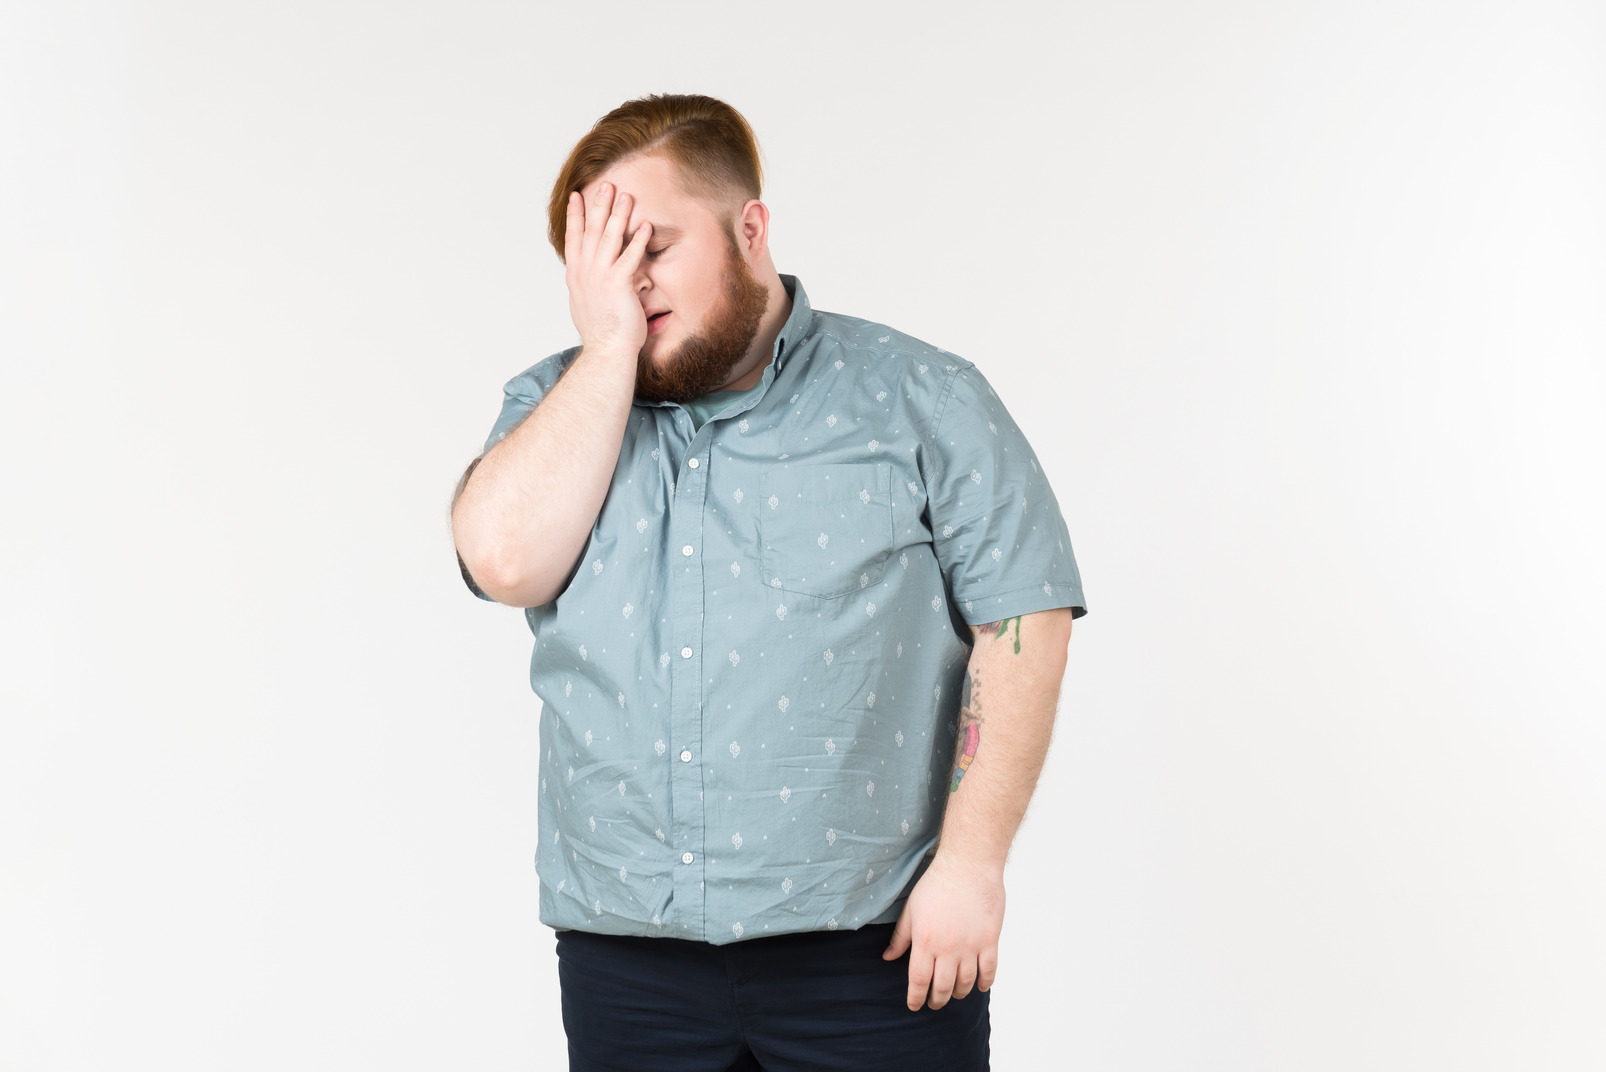 Confused looking young overweight man closing his face with a hand